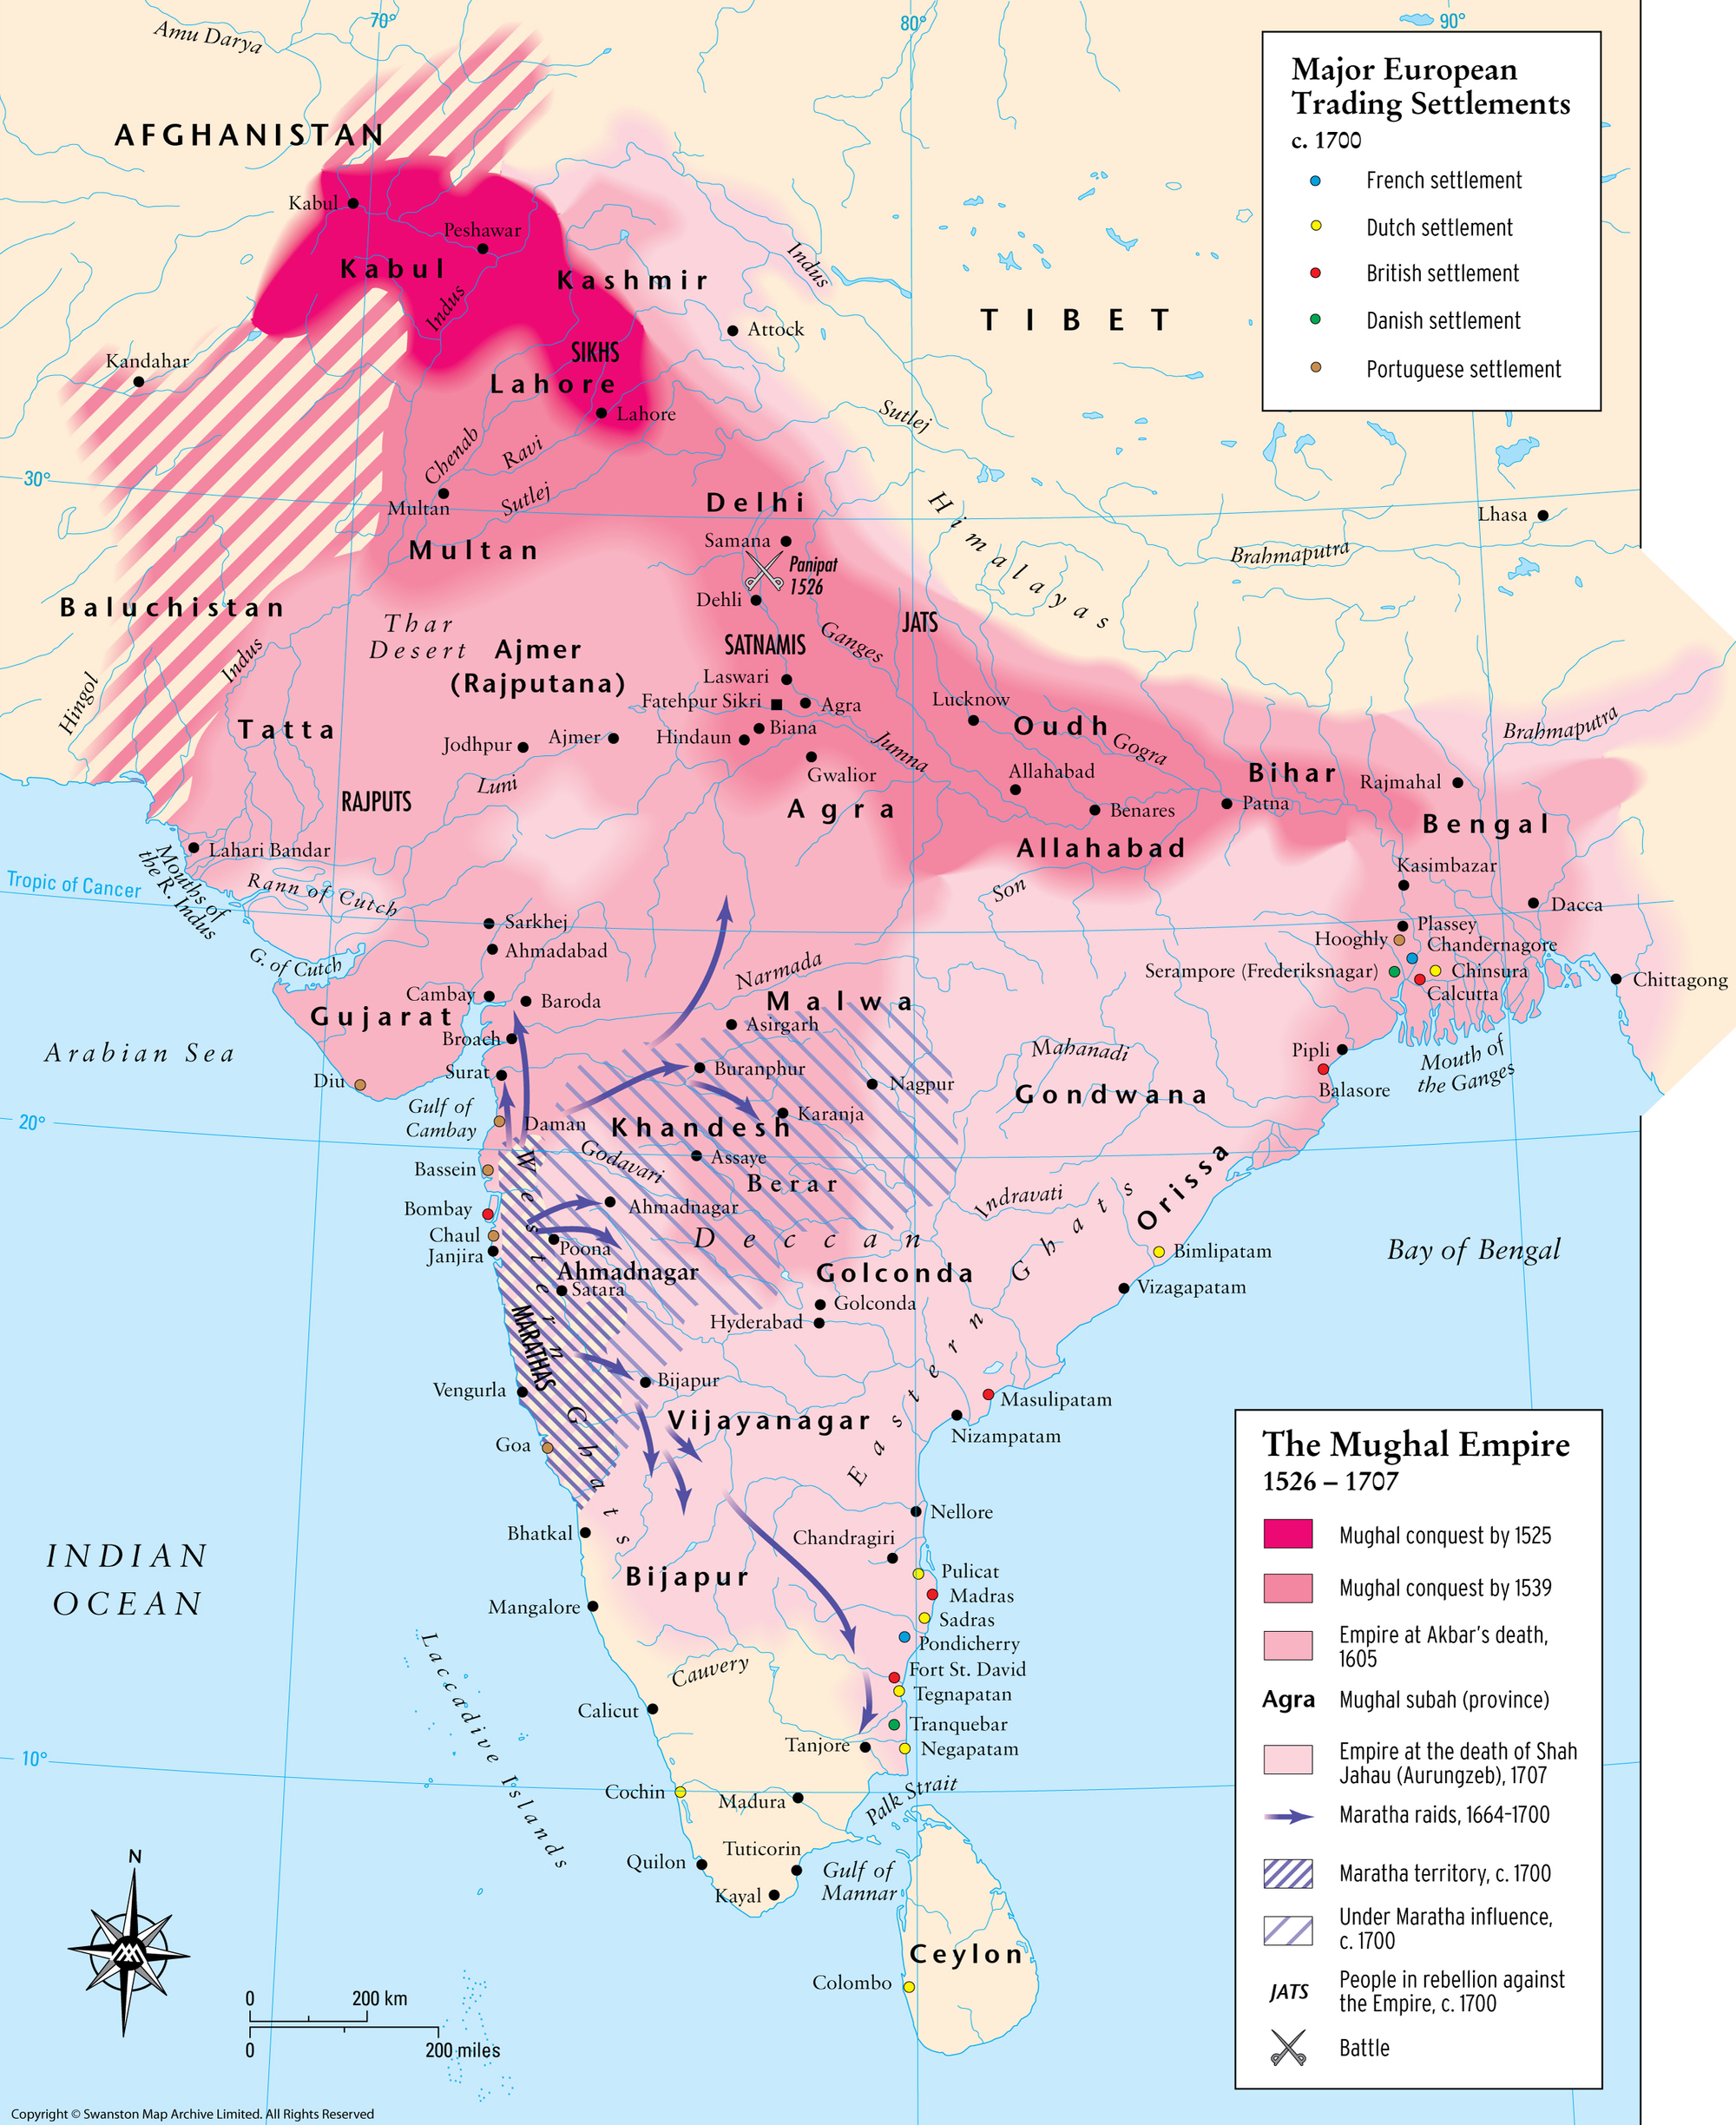 The growth of the Mughal Empire from 1526 to c.1700. Source: The Map Archive https://www.themaparchive.com/product/the-mughal-empire-15261707/